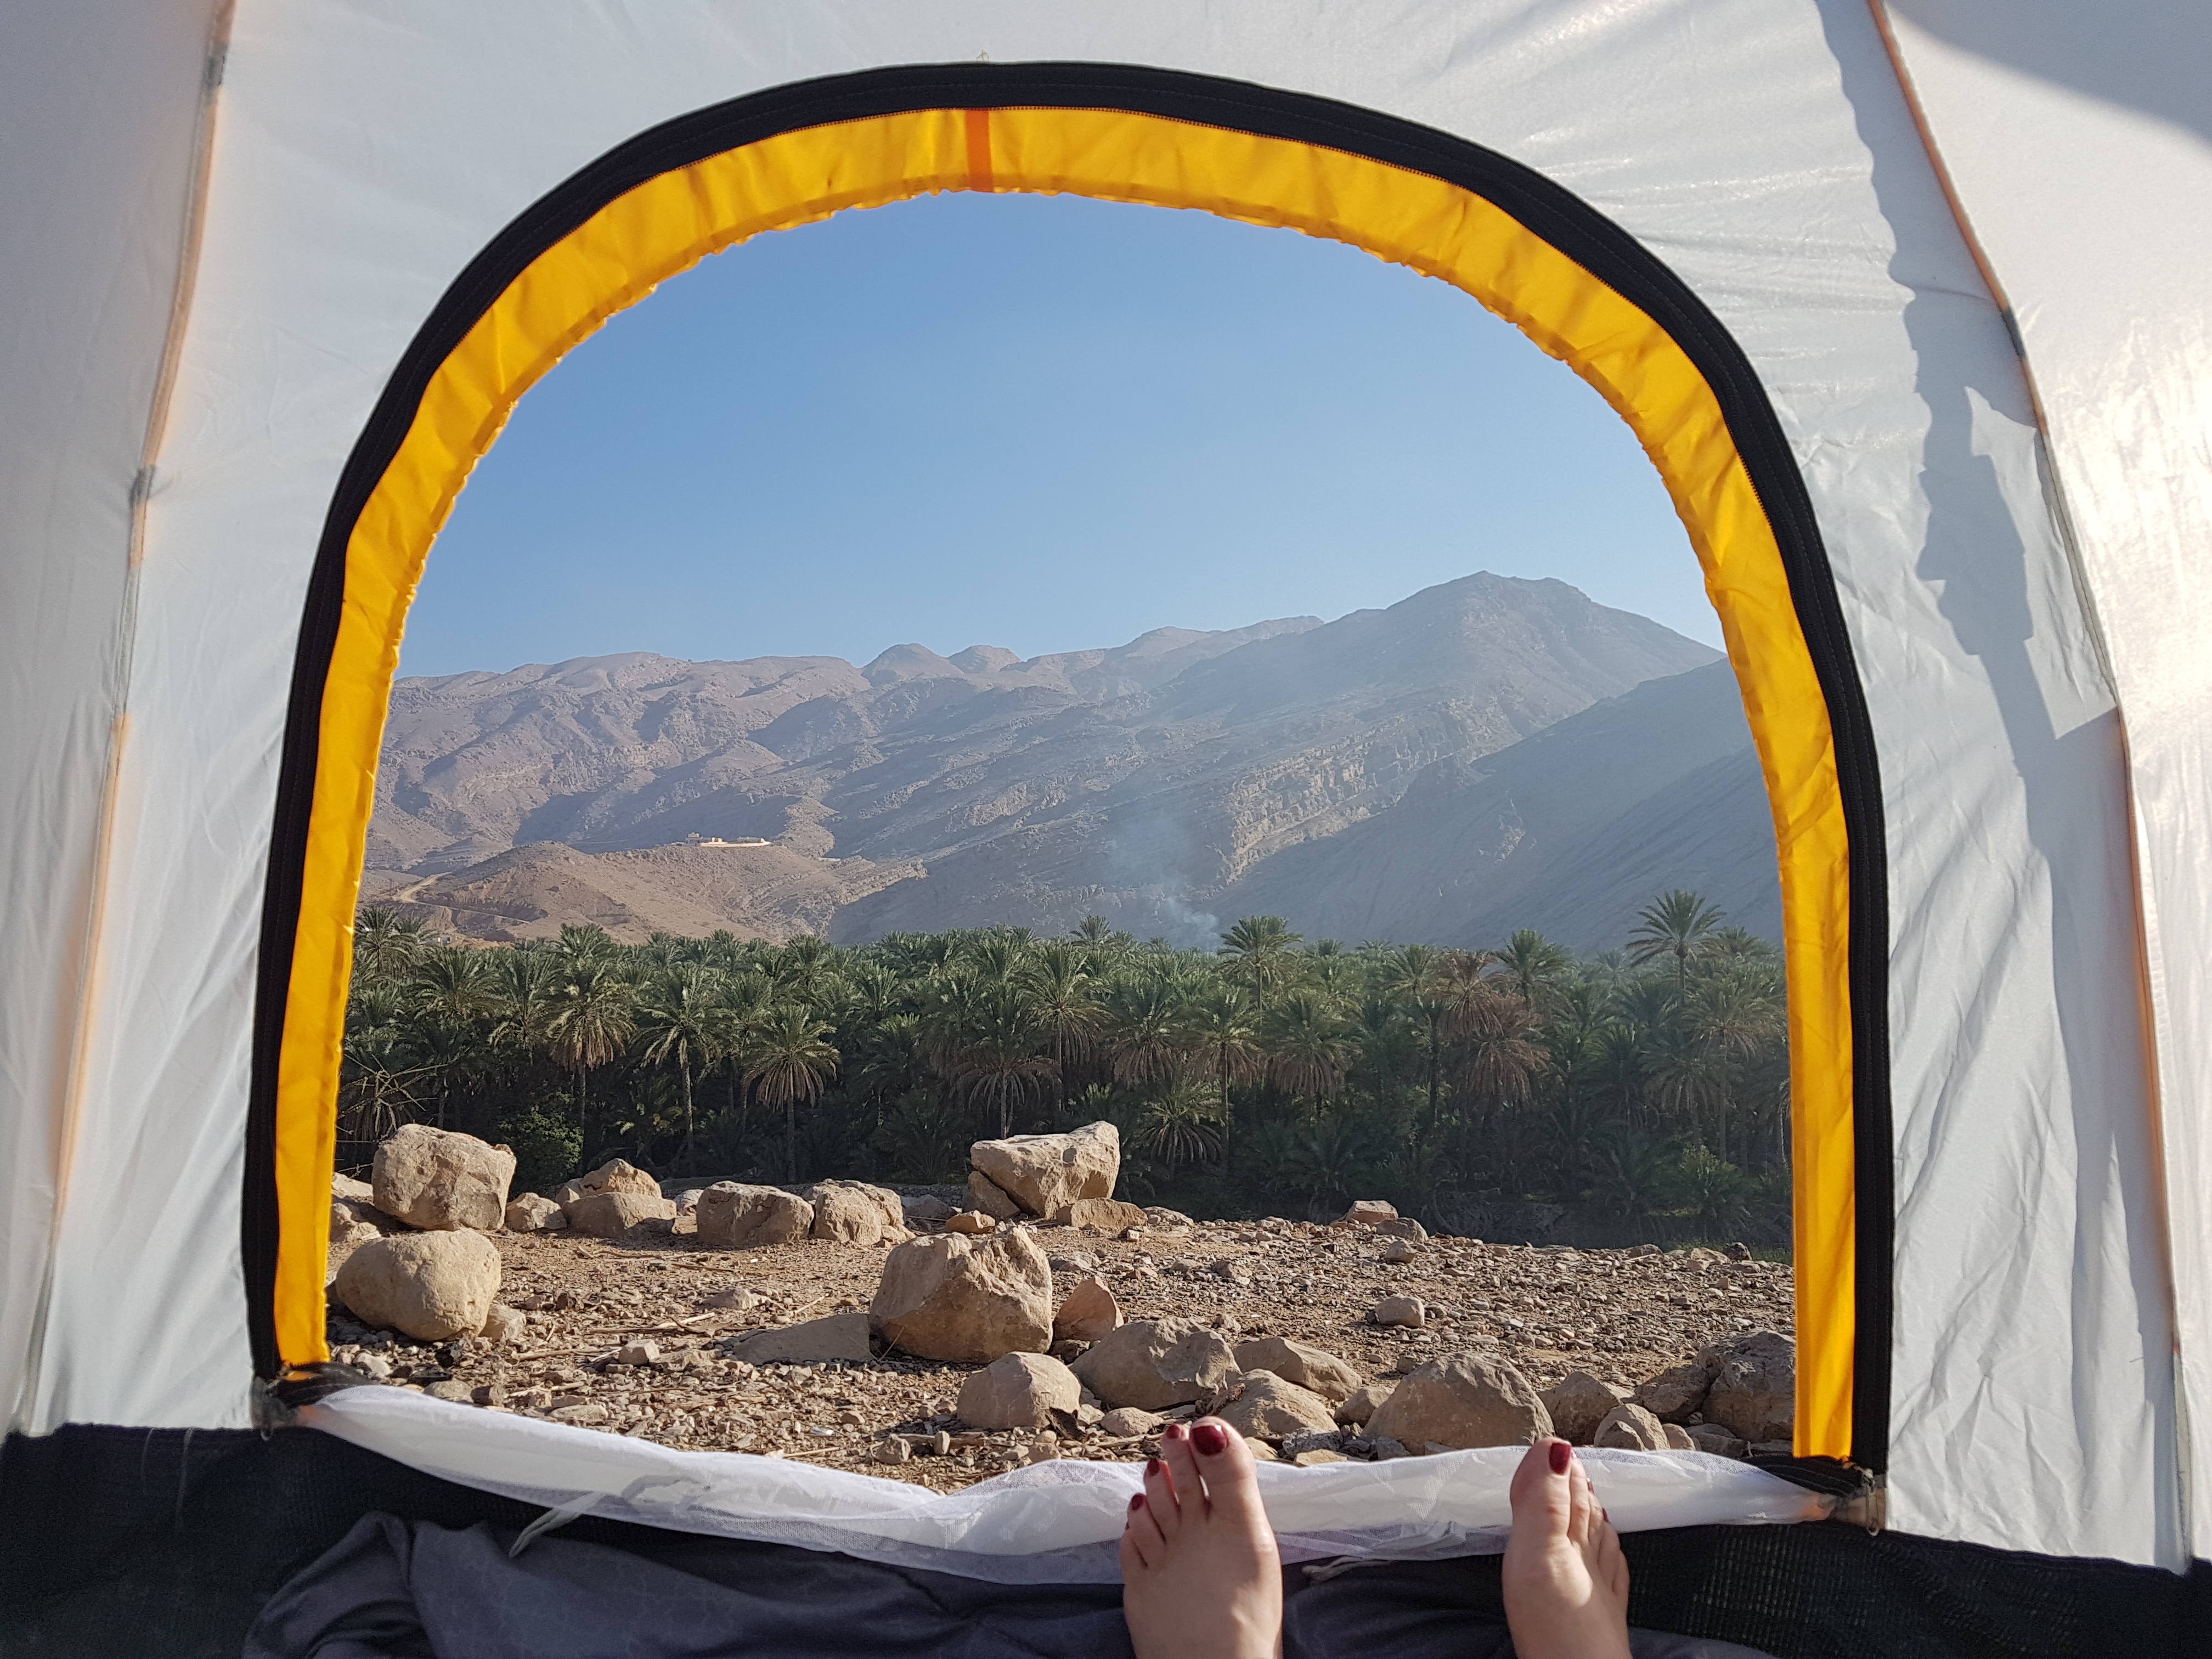 48 Hours in Oman with Wadis, Camping, Castles in Wadi Bani Khalid